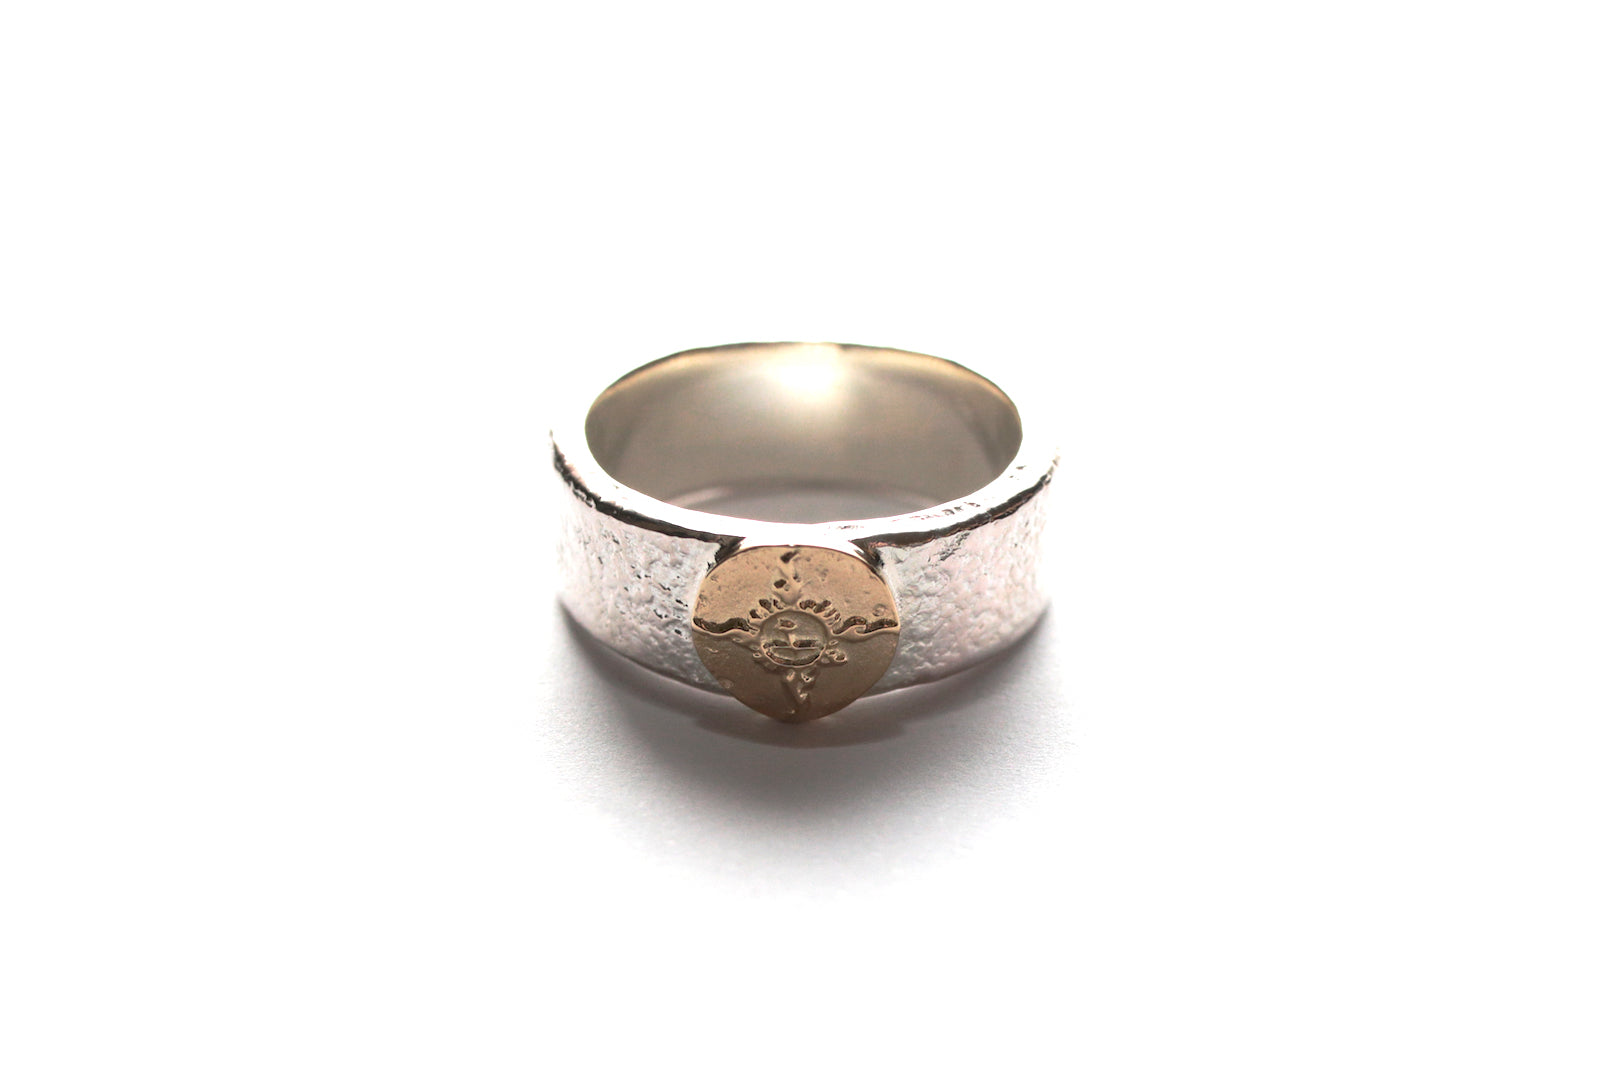 First Arrow's 8mm 'Bare Rock' Silver Ring with 18K Gold Emblem (R-036)